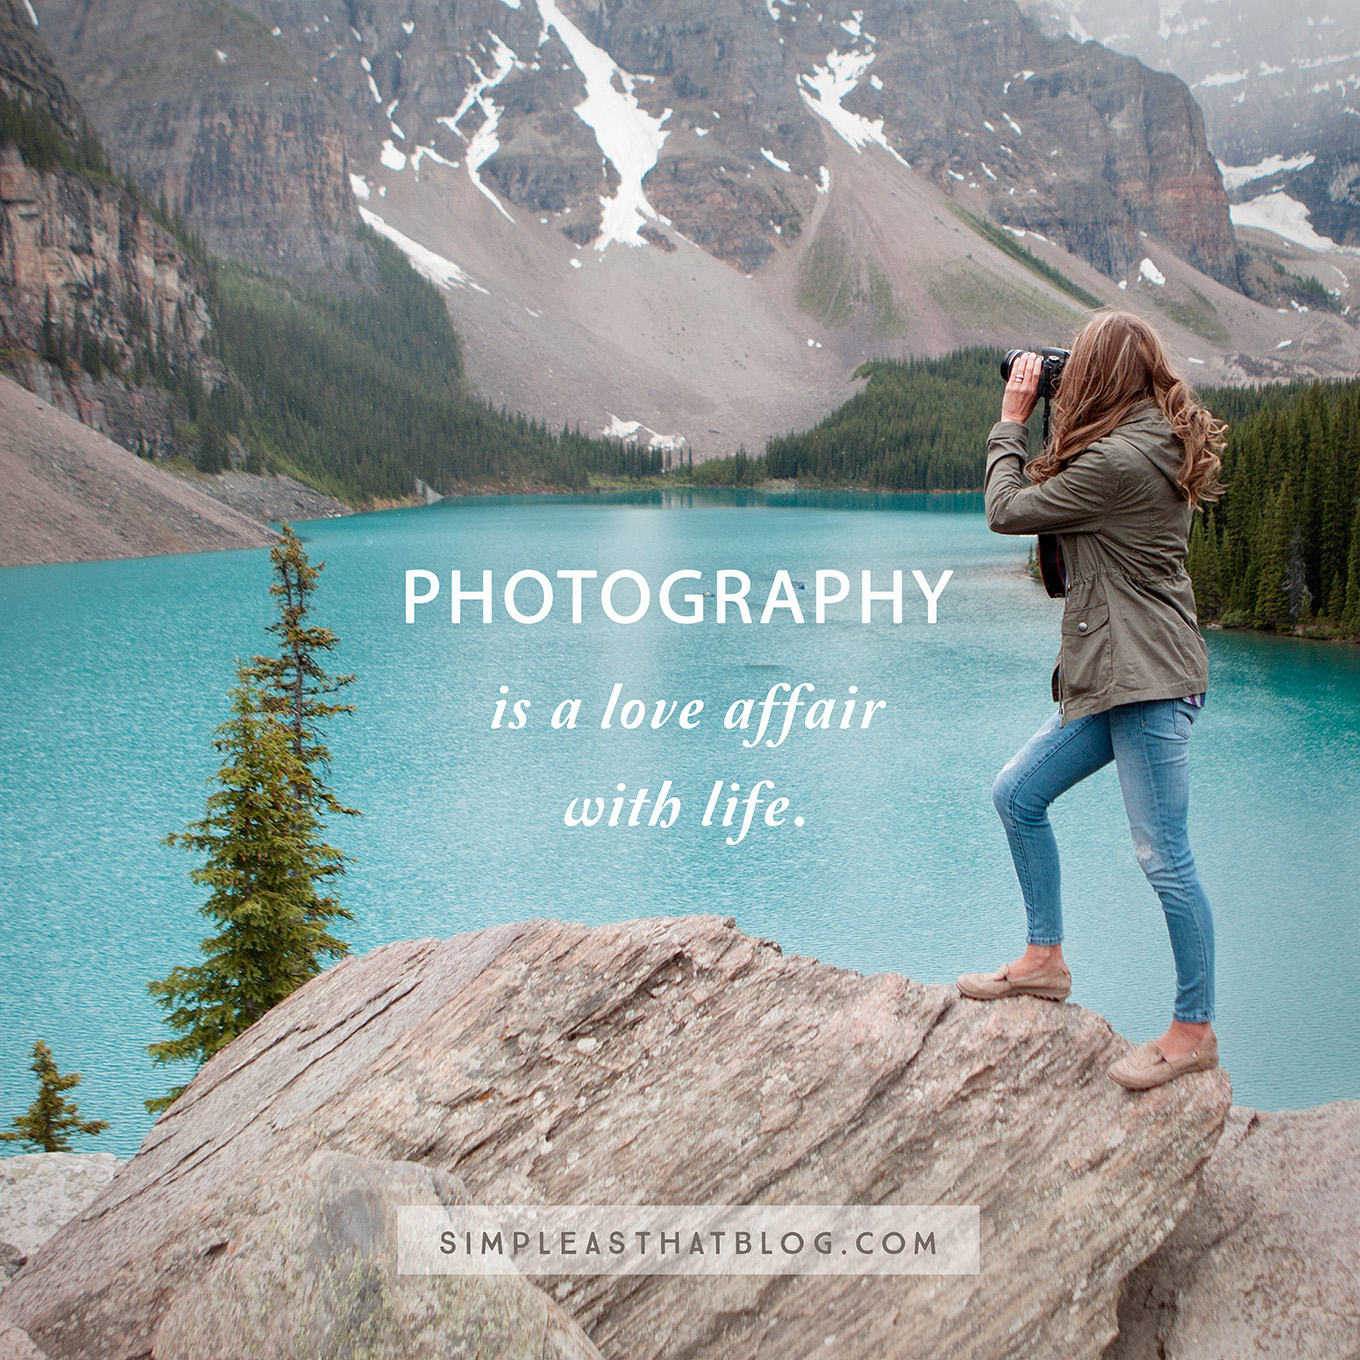 12 Quotes to Inspire your Photography Journey // Photography is a love affair with life. – unknown